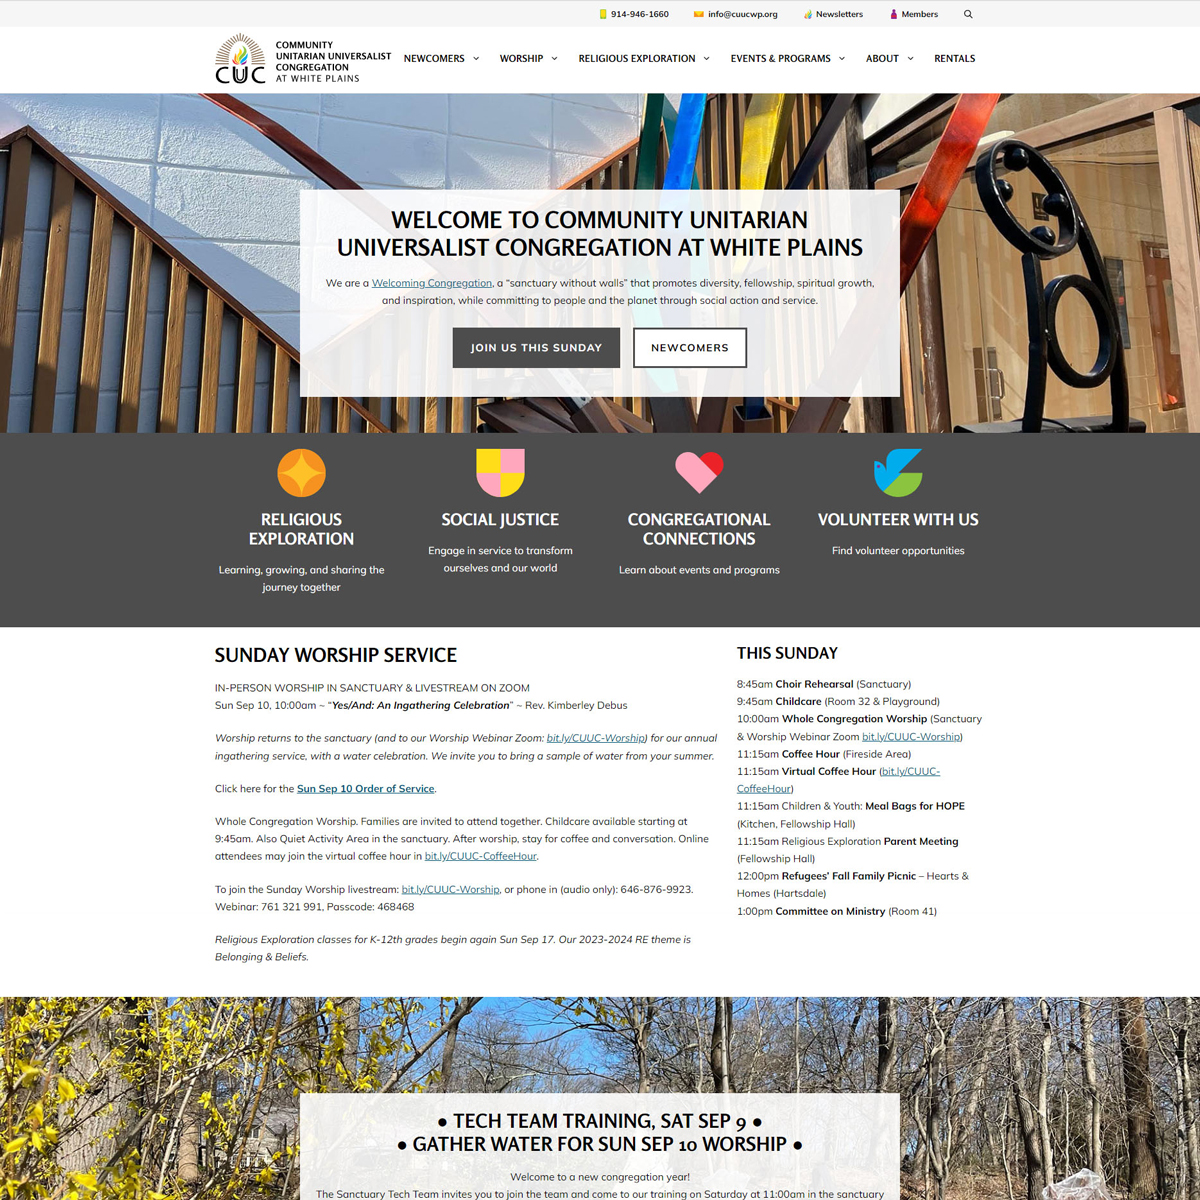 Website Redesign for Community Unitarian Universalist Congregation at White Plains